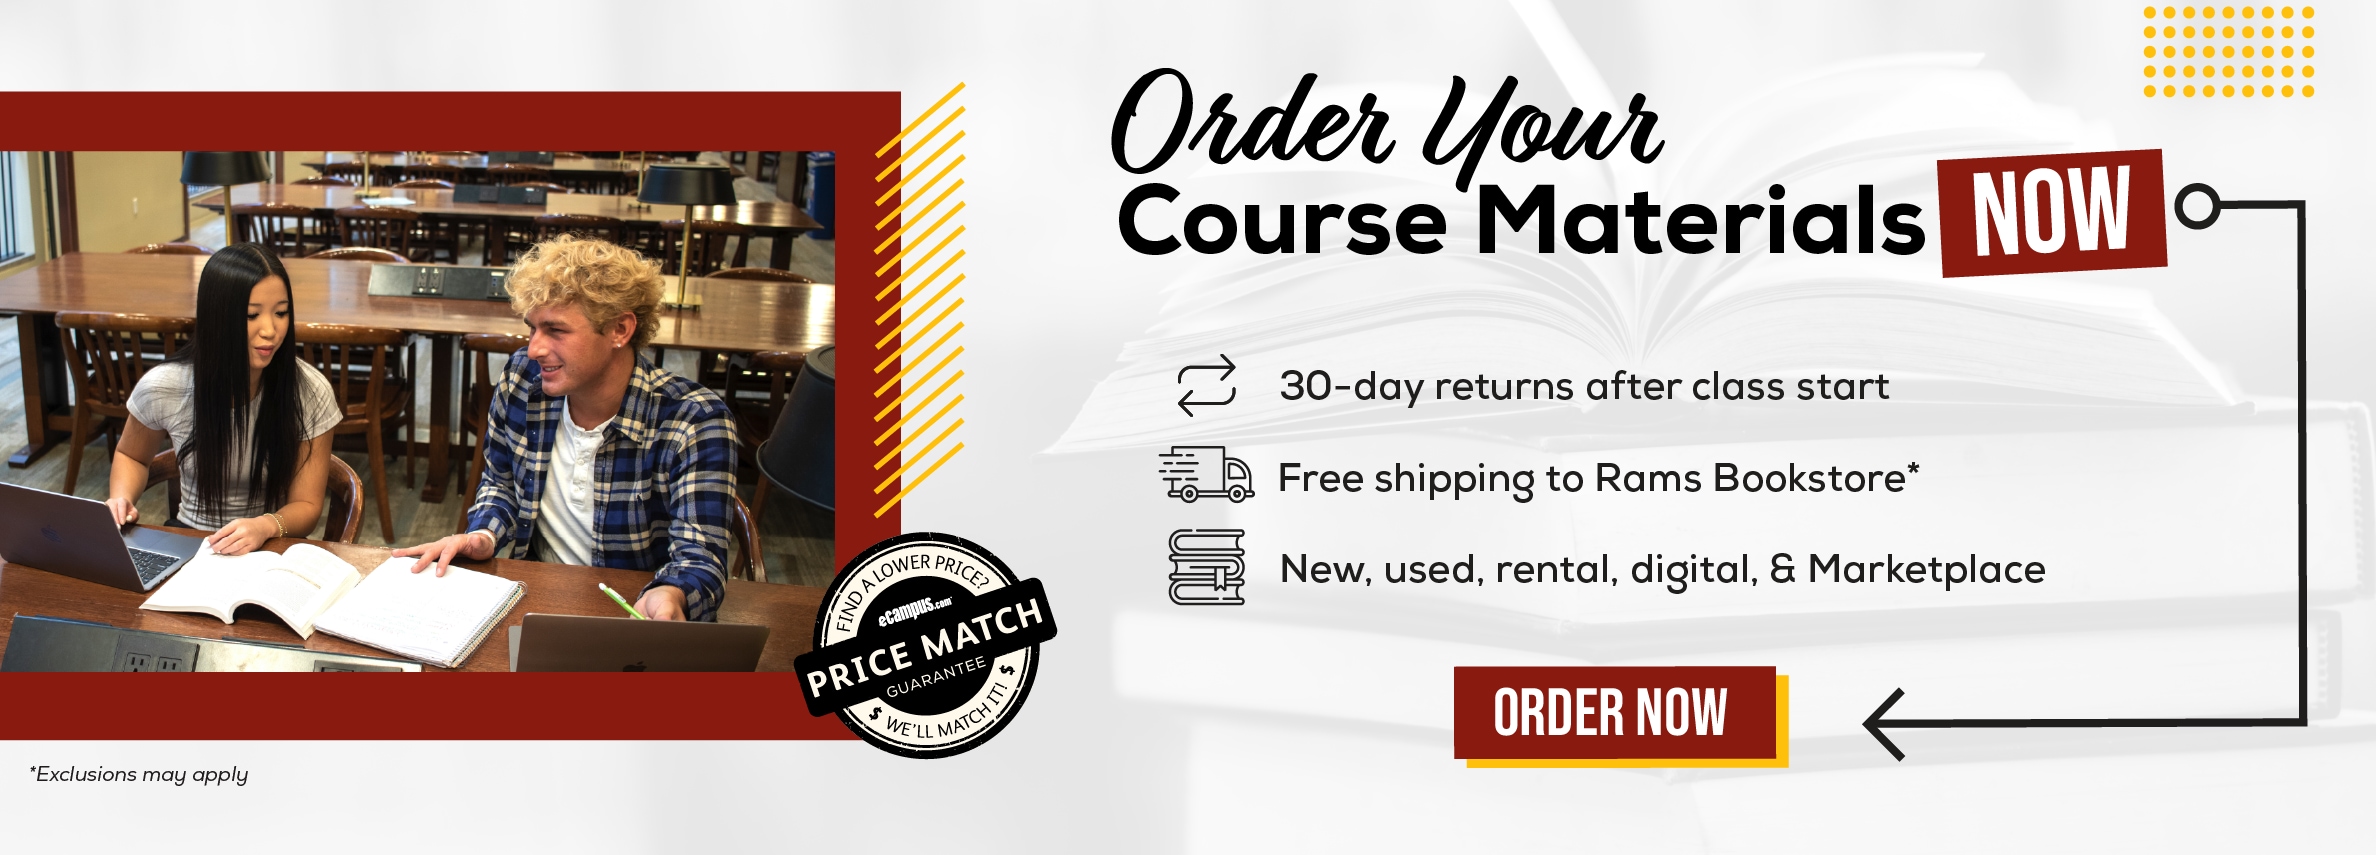 Order Your Course Materials Now. 30-day returns after class start. Free shipping to the Rams Bookstore*. New, used, rental, digital, & Marketplace. Order now. *Exclusions may apply.